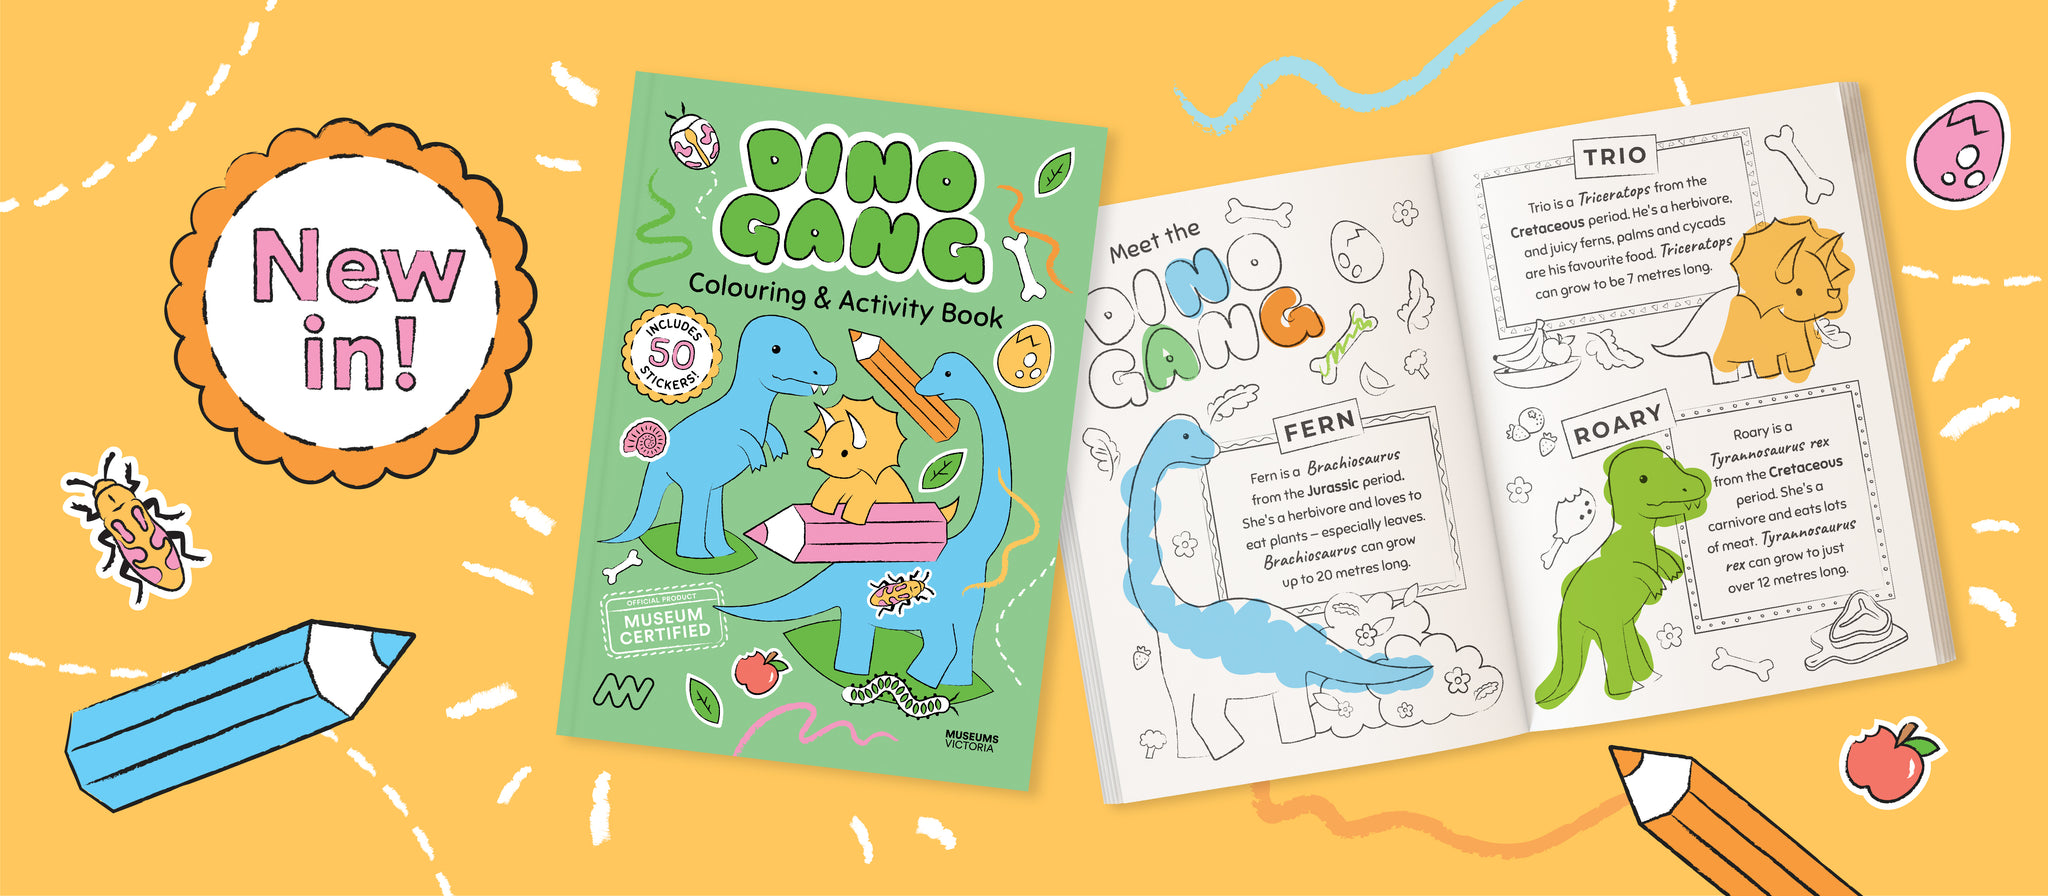 New Release: Dino Gang Colouring & Activity Book